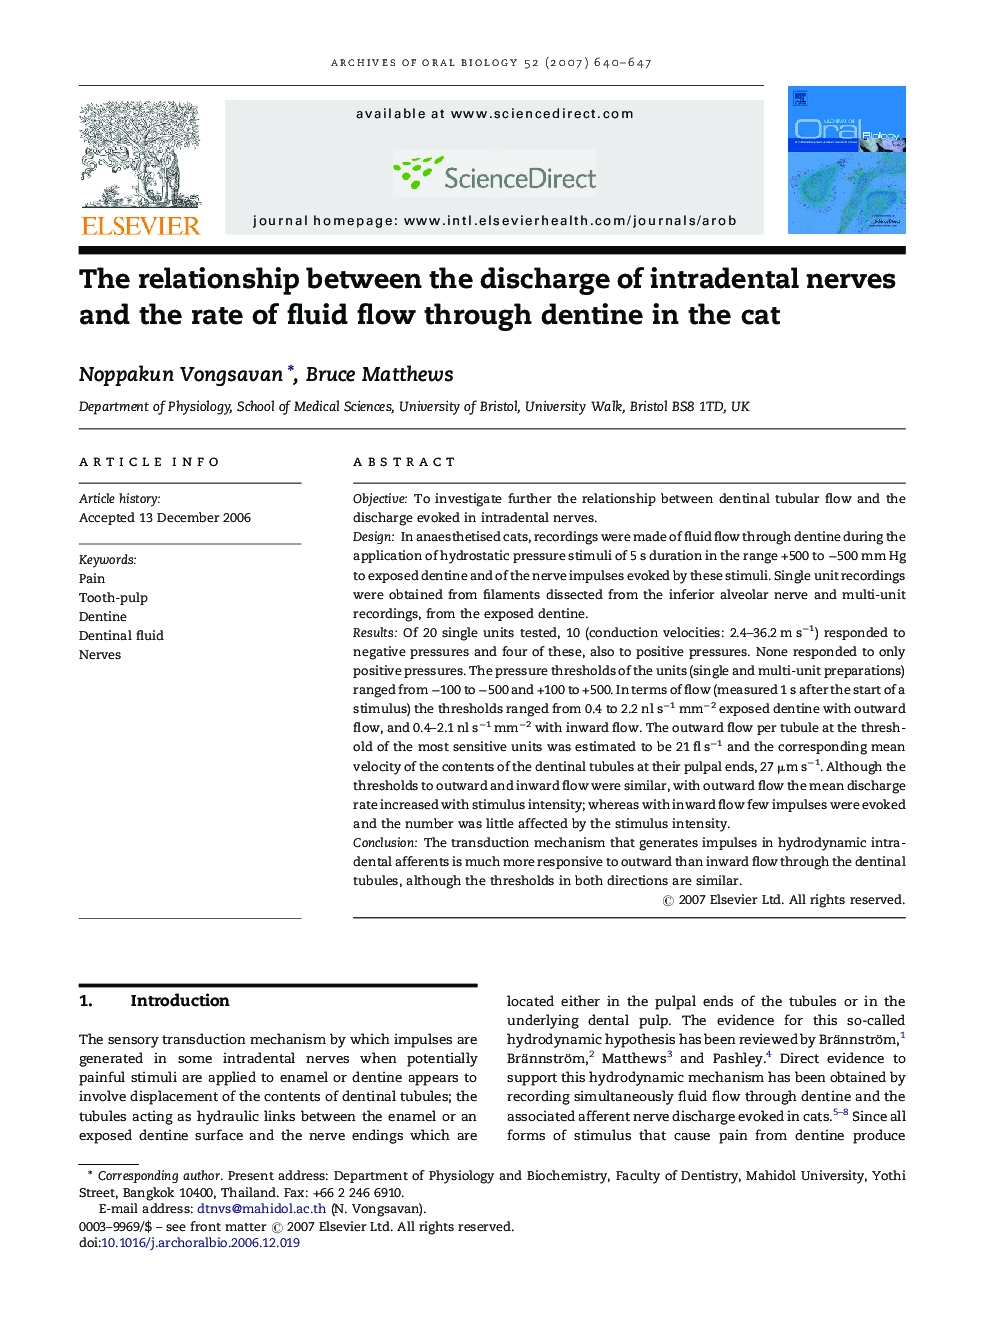 The relationship between the discharge of intradental nerves and the rate of fluid flow through dentine in the cat